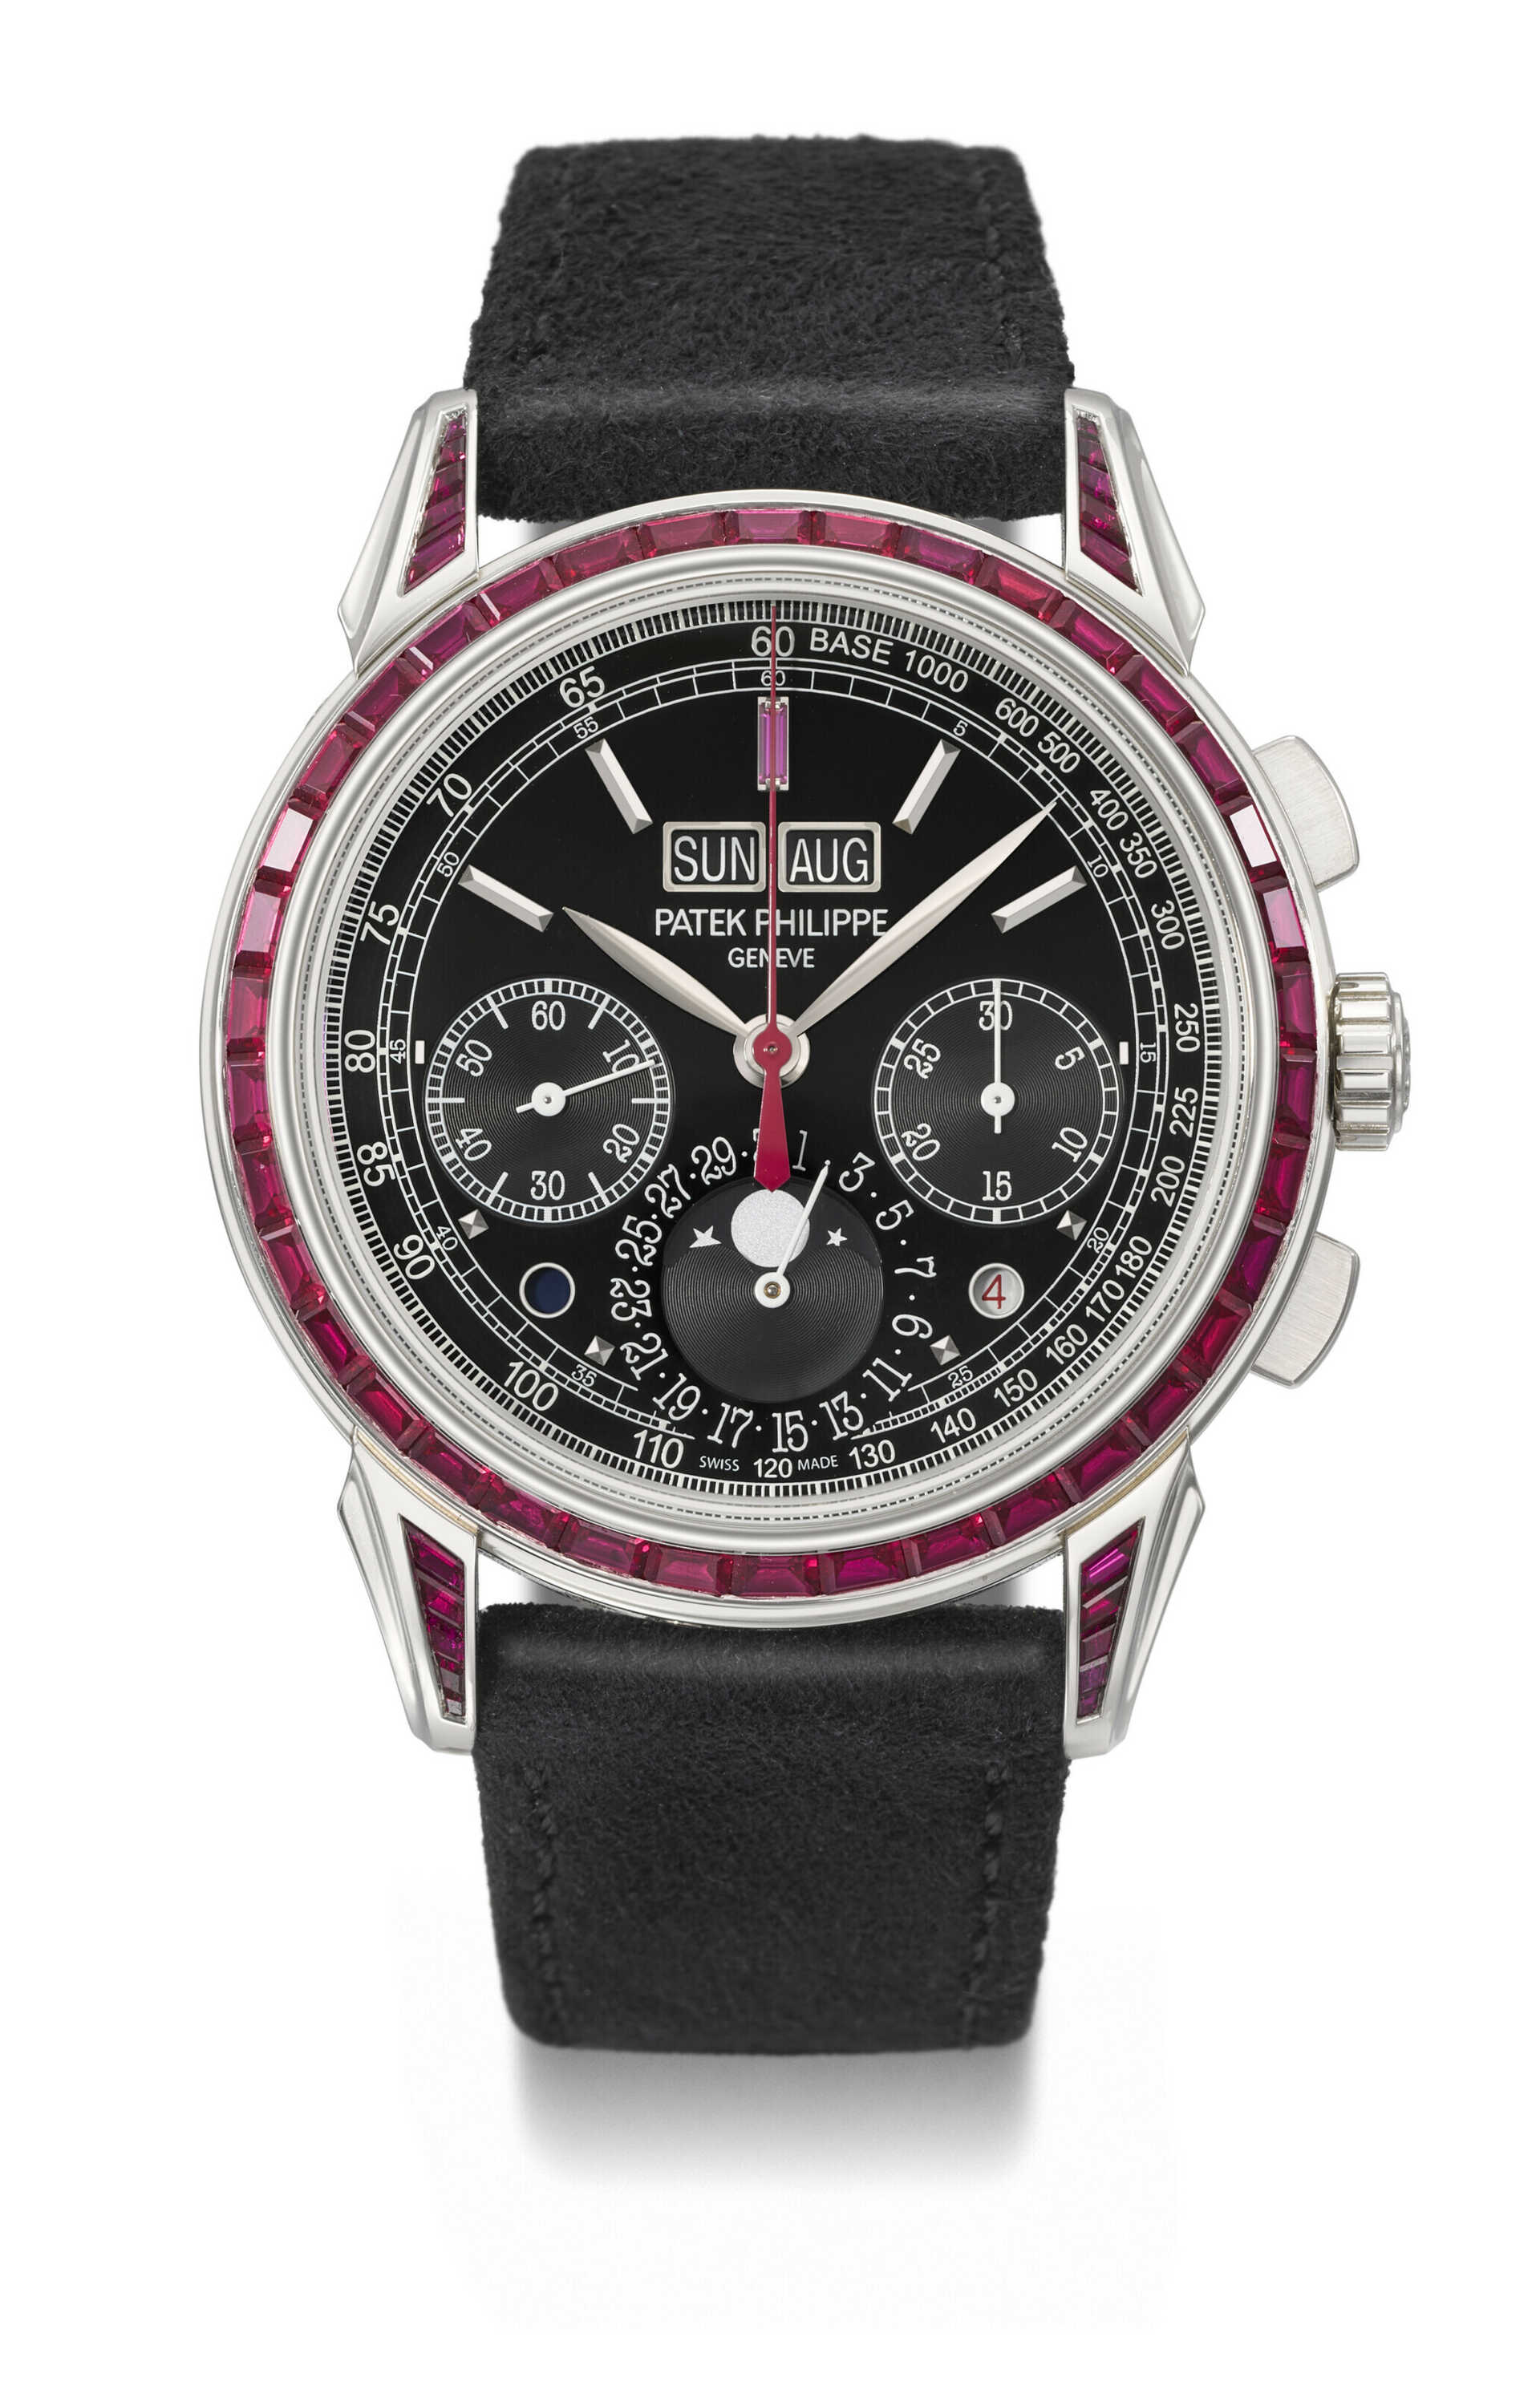 PATEK PHILIPPE. A HIGHLY IMPRESSIVE AND EXTREMELY RARE PLATINUM AND RUBY-SET PERPETUAL CALENDAR CHRONOGRAPH WRISTWATCH WITH MOON PHASES, LEAP YEAR AND DAY/NIGHT INDICATION